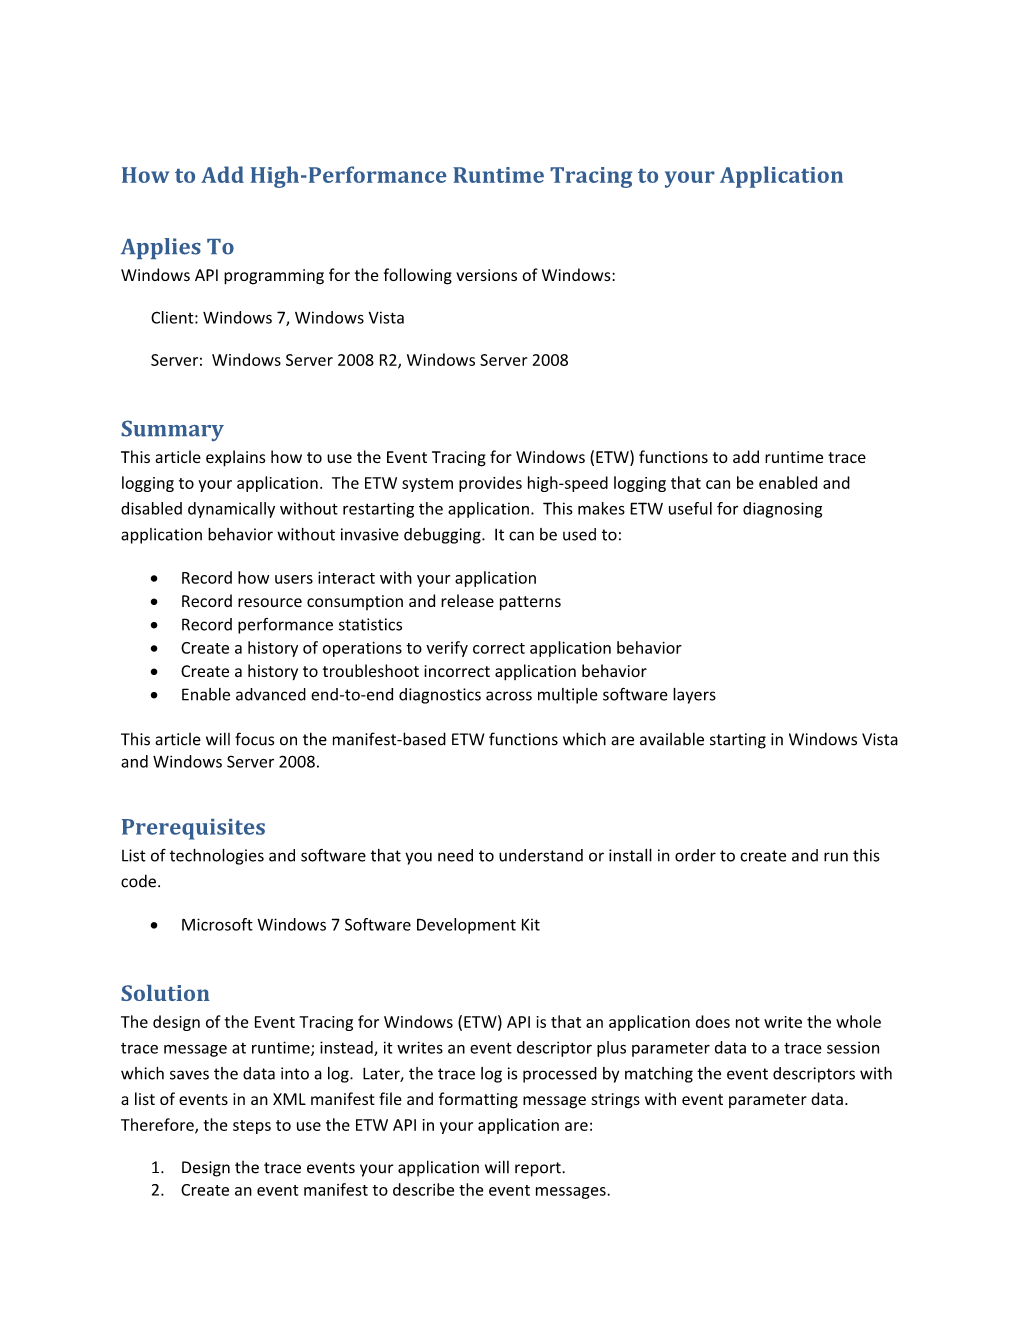 How to Add High-Performance Runtime Tracing to Your Application